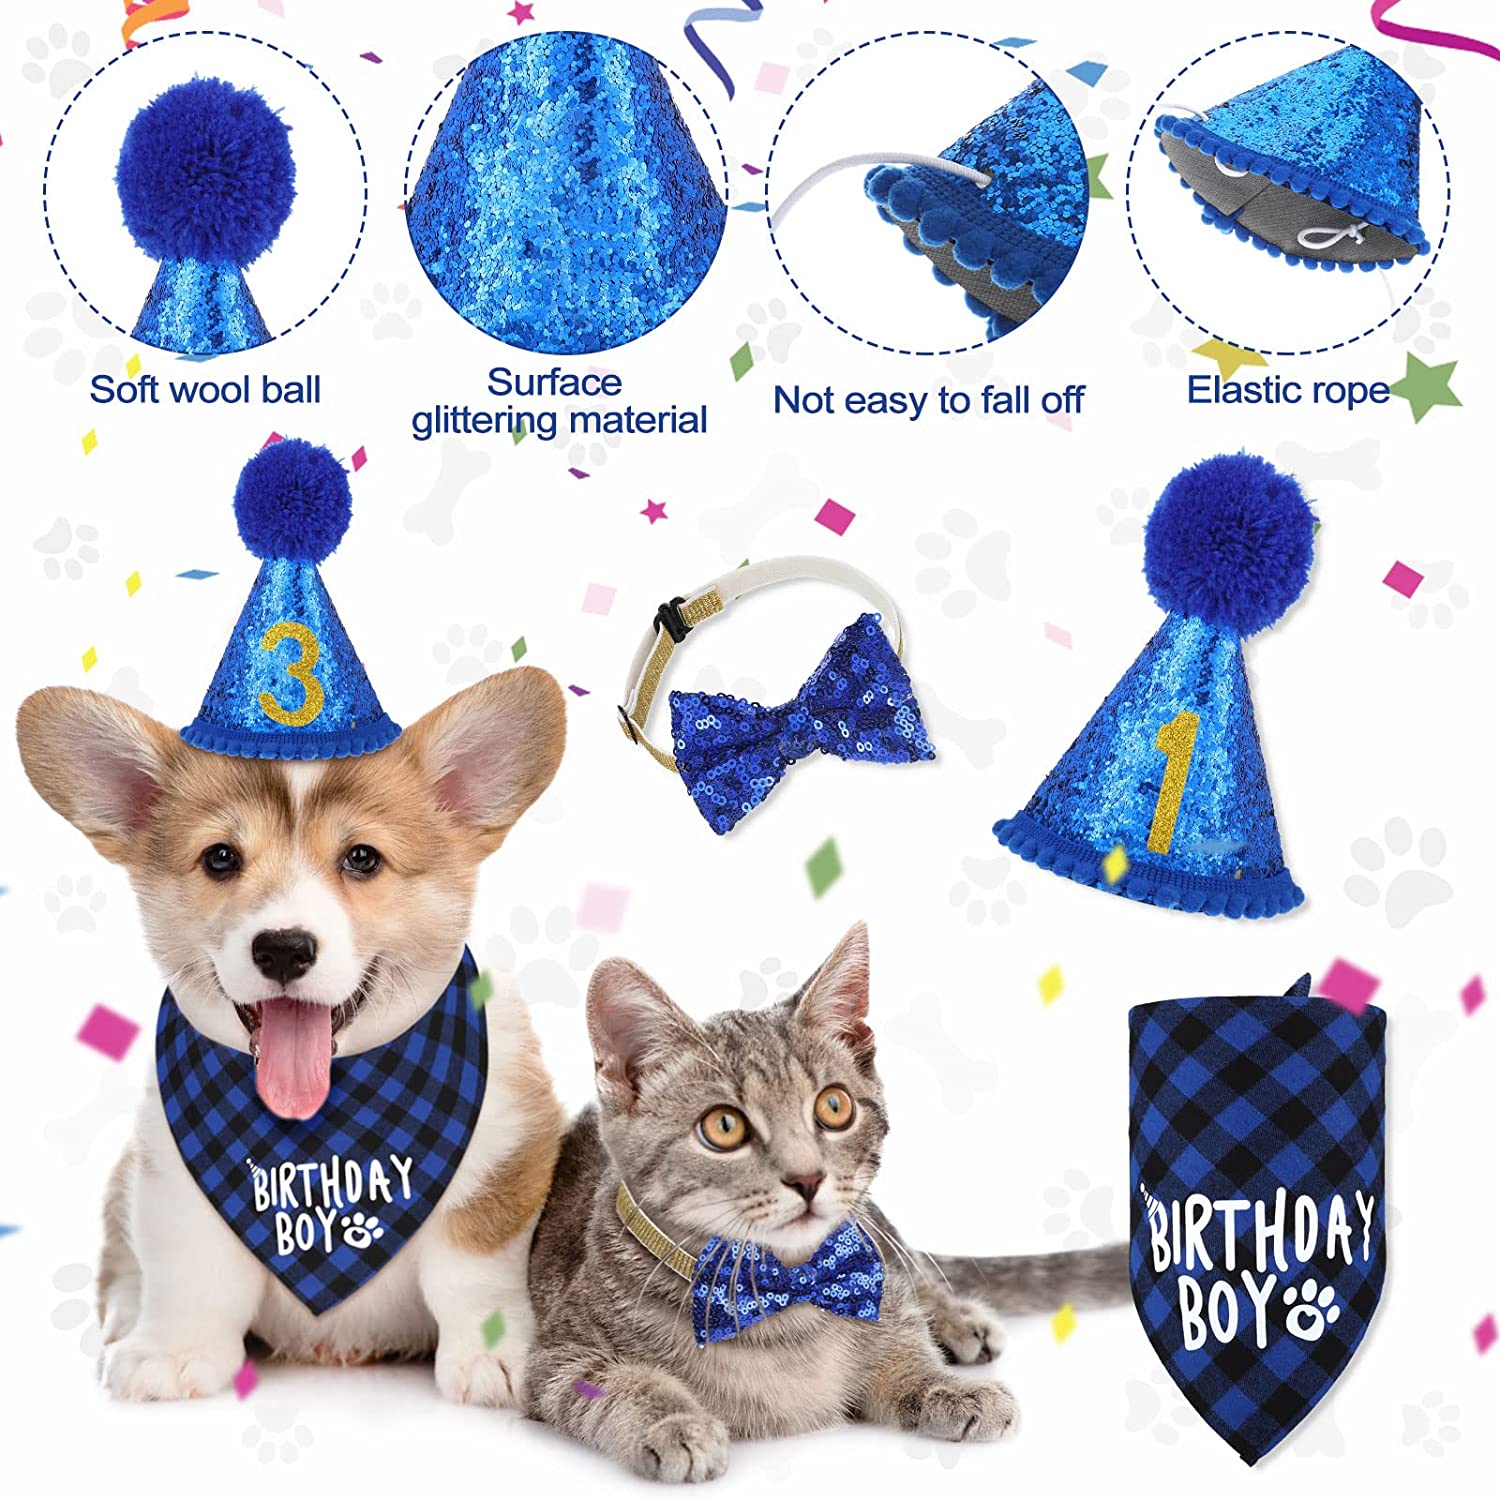 KUTKUT Dog Birthday Party Supplies Birthday Girl Dog Bandana Triangle Scarf Clothes Shirt Cute Dog Hat Dog Bow Tie Collar with 0-8 Numbers for Puppy Dog 1st Birthday Party Outfits - kutkutsty